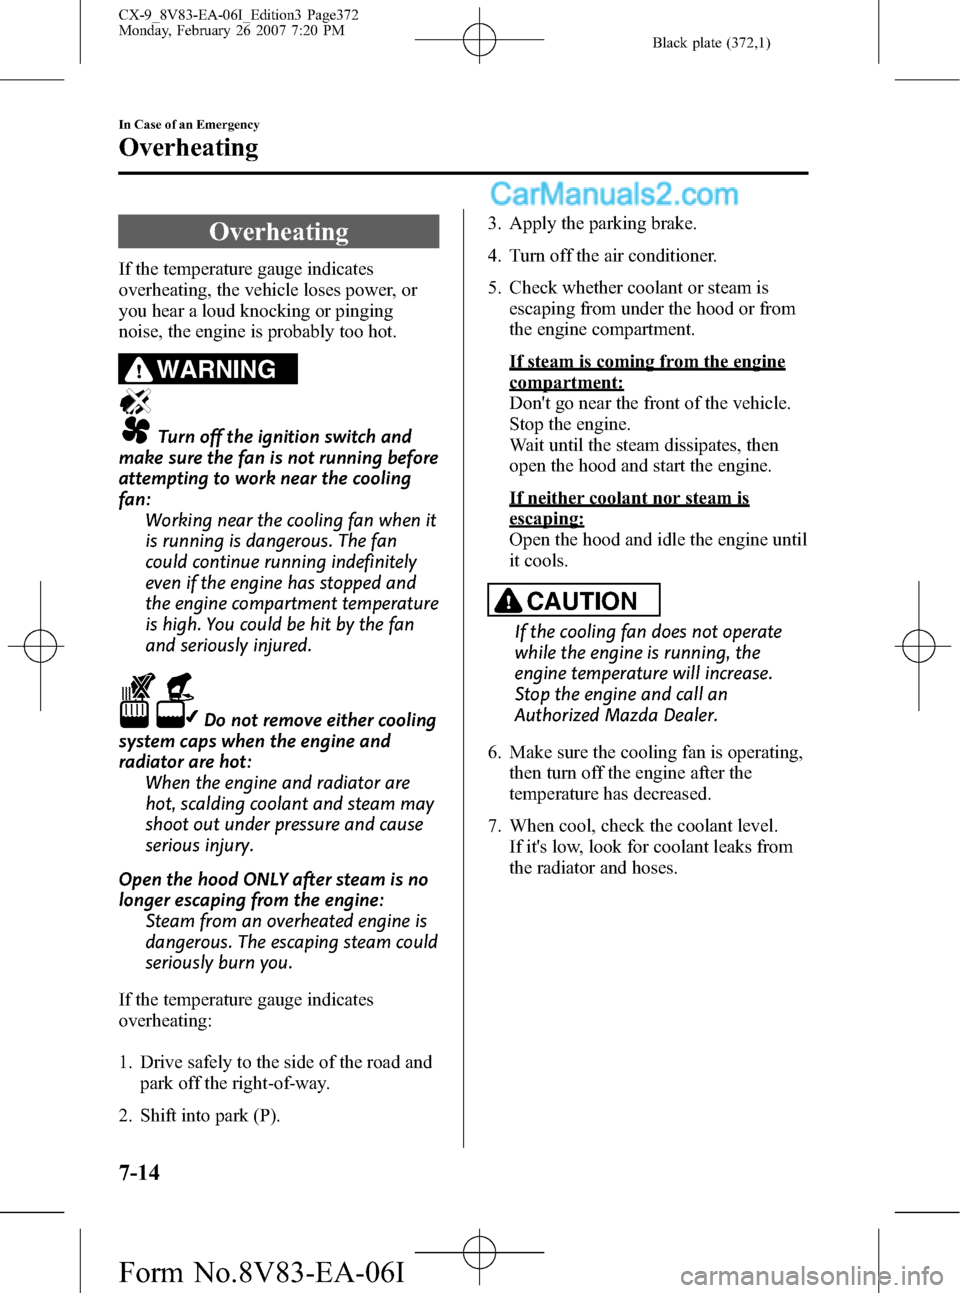 MAZDA MODEL CX-9 2007  Owners Manual (in English) Black plate (372,1)
Overheating
If the temperature gauge indicates
overheating, the vehicle loses power, or
you hear a loud knocking or pinging
noise, the engine is probably too hot.
WARNING
Turn off 